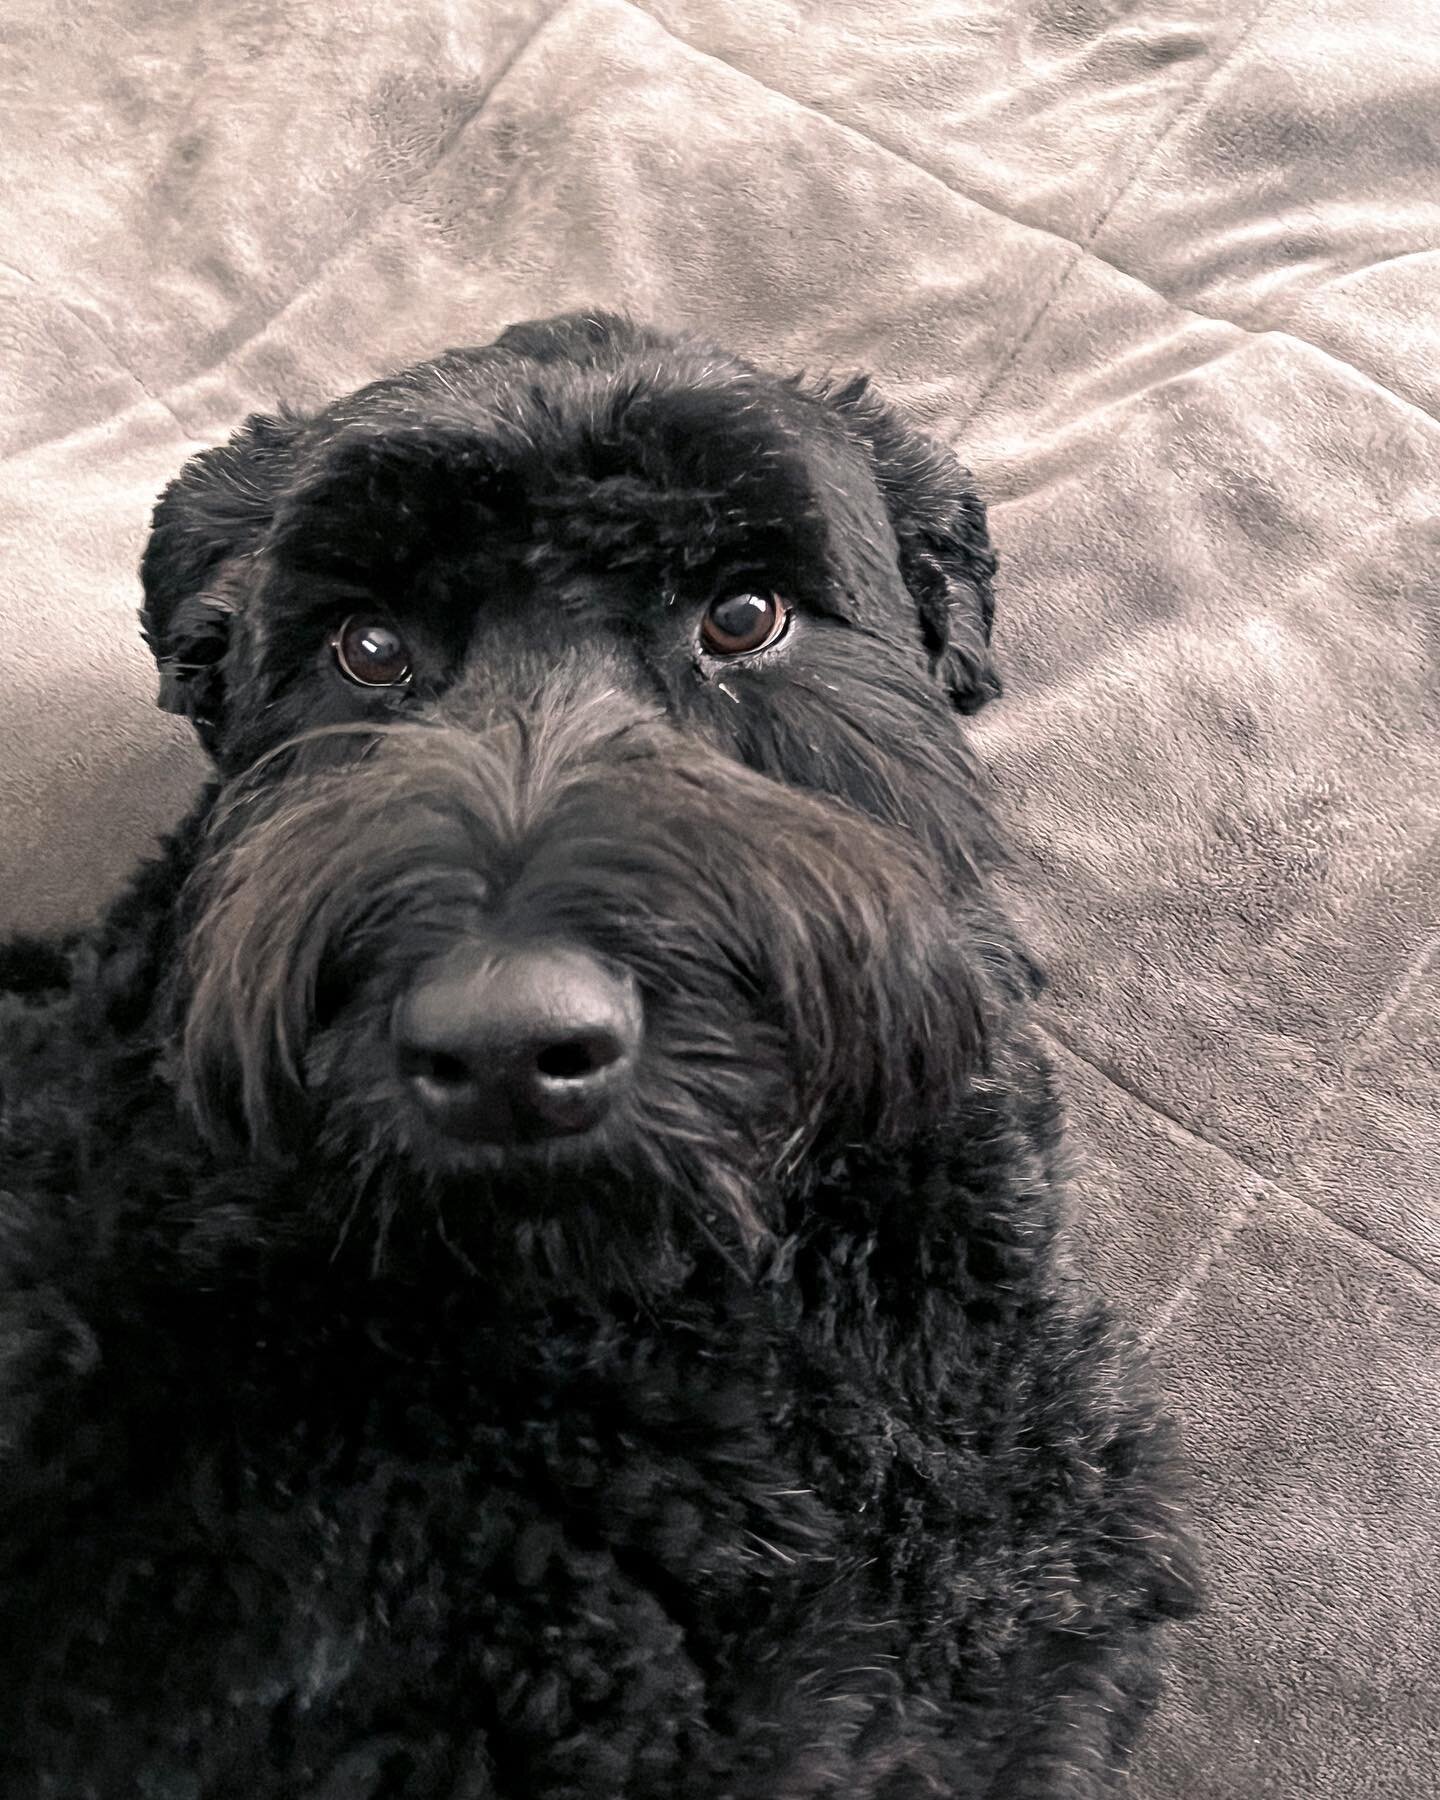 The sweetest baby girl eyes 😍👀 Ripley may be 4, but she is definitely still the baby of the family! 

#ripleythegiant #giantlife #giantschnauzer #giantschnauzersofinstagram #dogsofinstagram #doglife #arkansasliving #schnauzer #schnauzersofinstagram